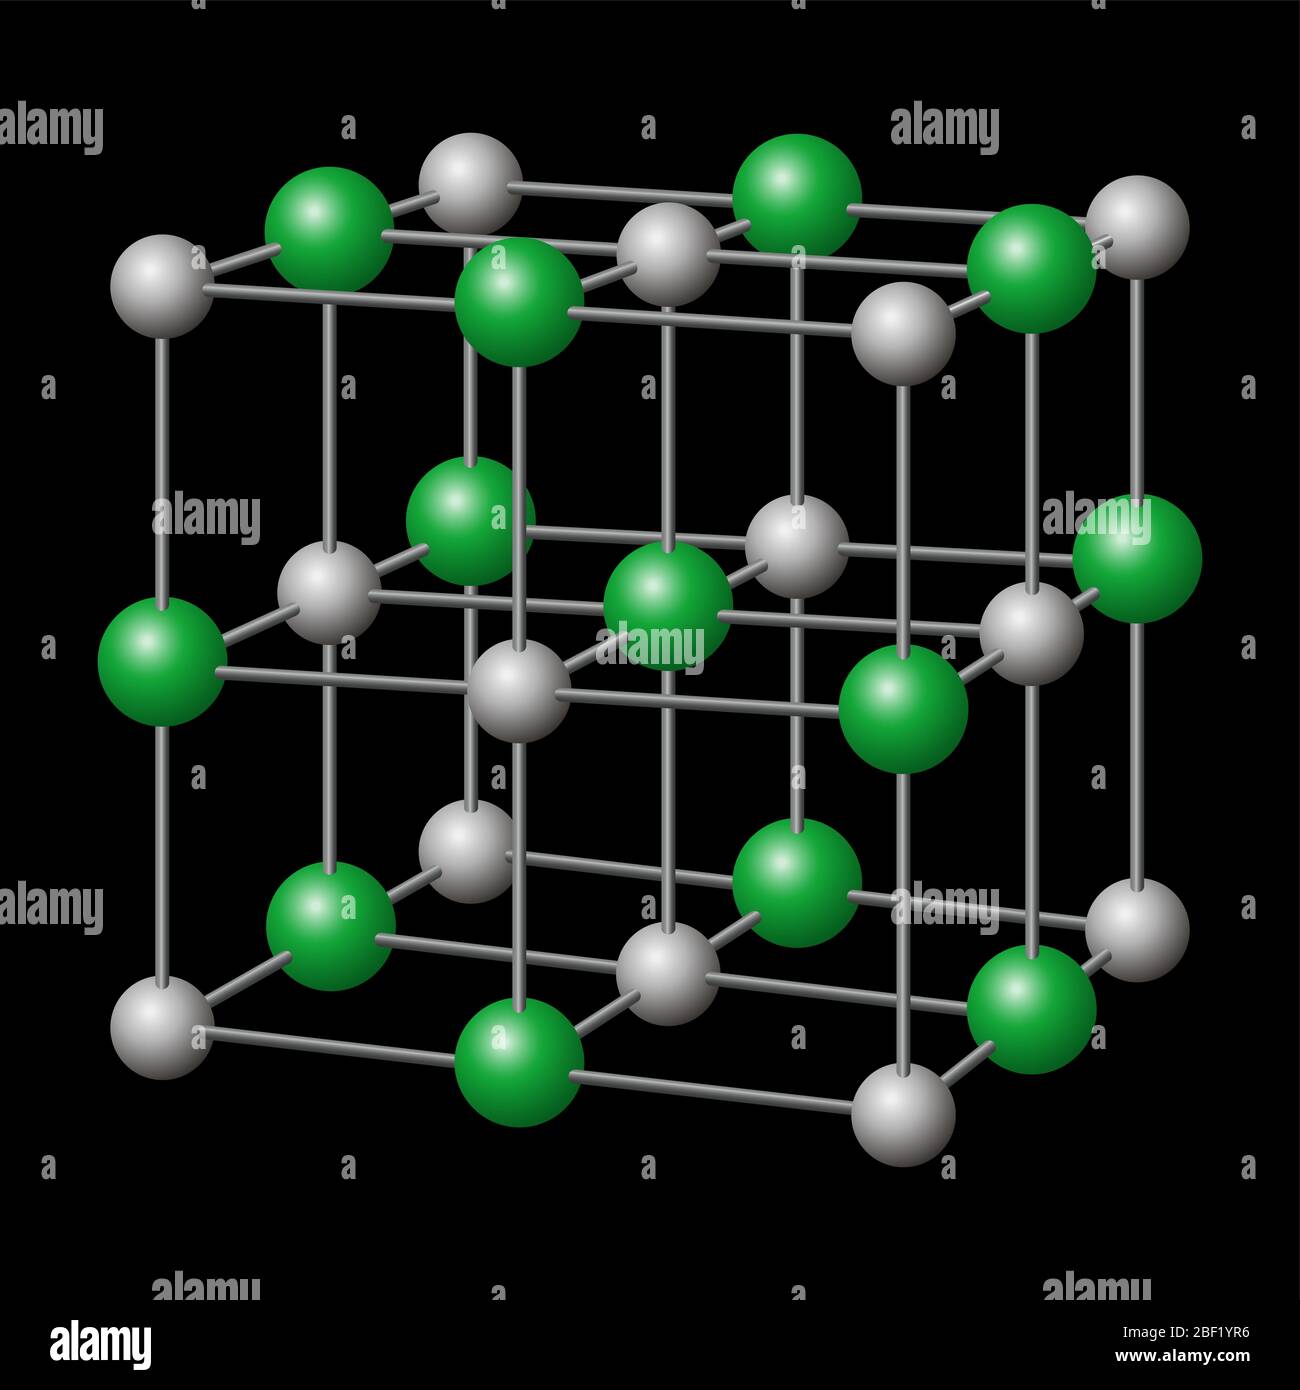 Sodium chloride, NaCl crystal structure with sodium in gray and chloride in green. Chemical compound, edible as table salt. Stock Photo